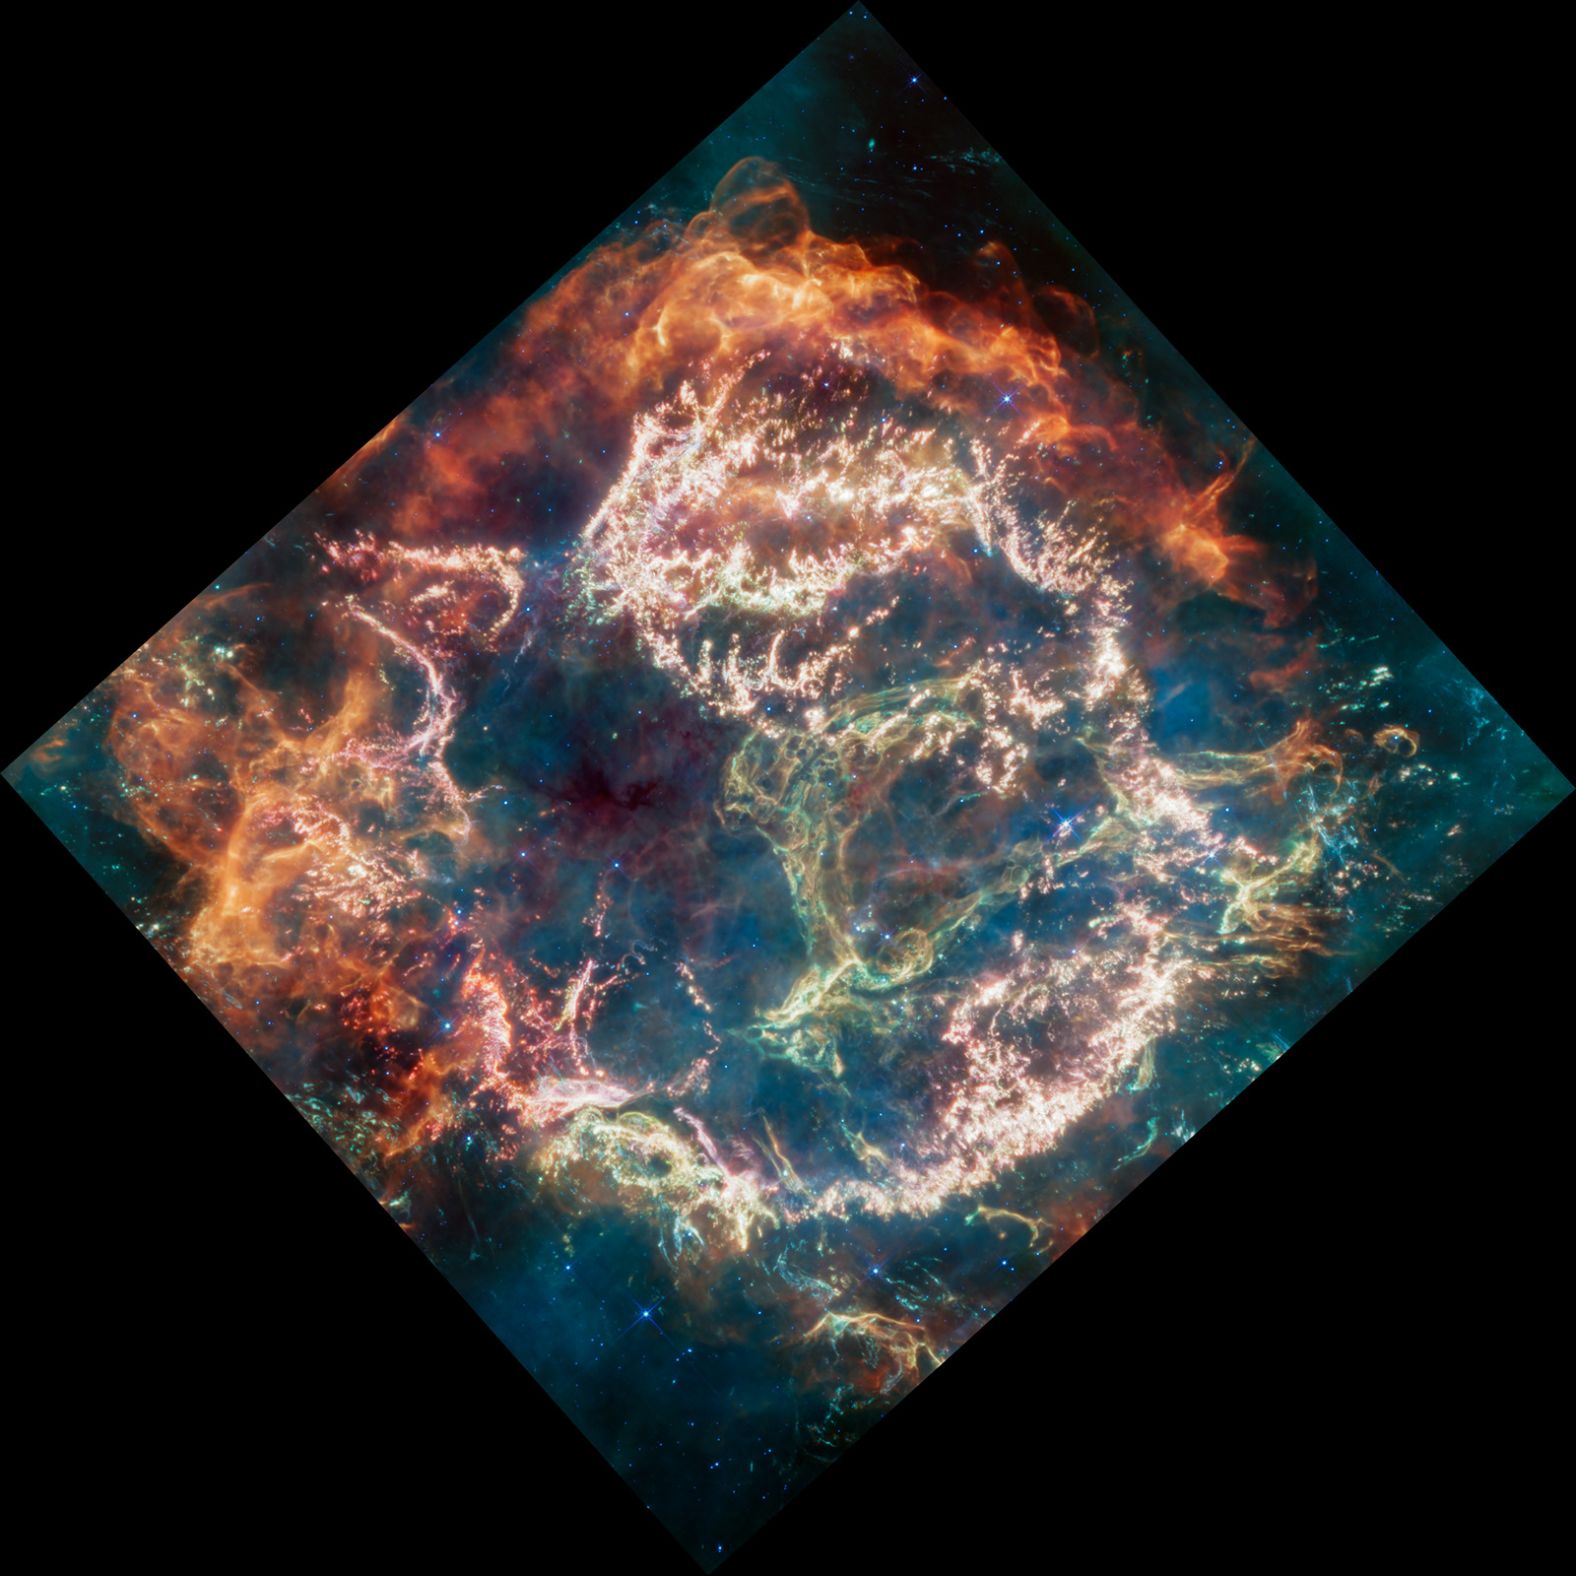 Stunning details can be seen in this Webb telescope photo of supernova remnant Cassiopeia A, which is 11,000 light-years from Earth.  